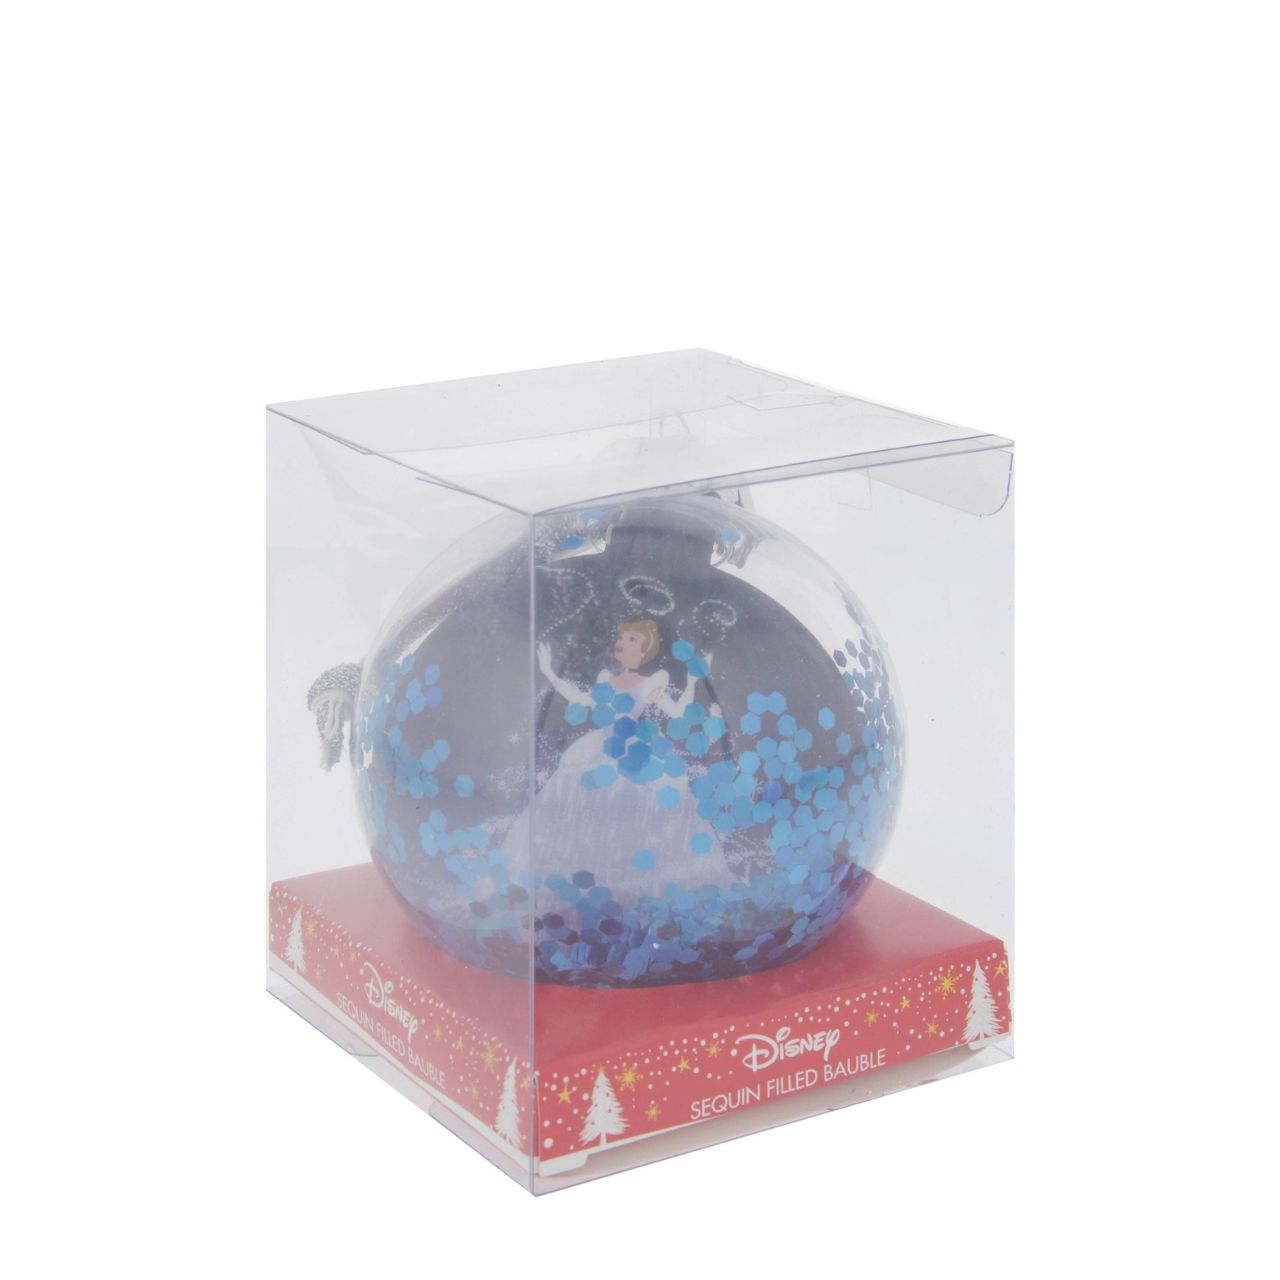 Disney Cinderella Sequin 2D Bauble  Bring the magic and glamour of the Disney princesses to the festivity with this wonderful 7.5cm aqua marine Cinderella sequin bauble.